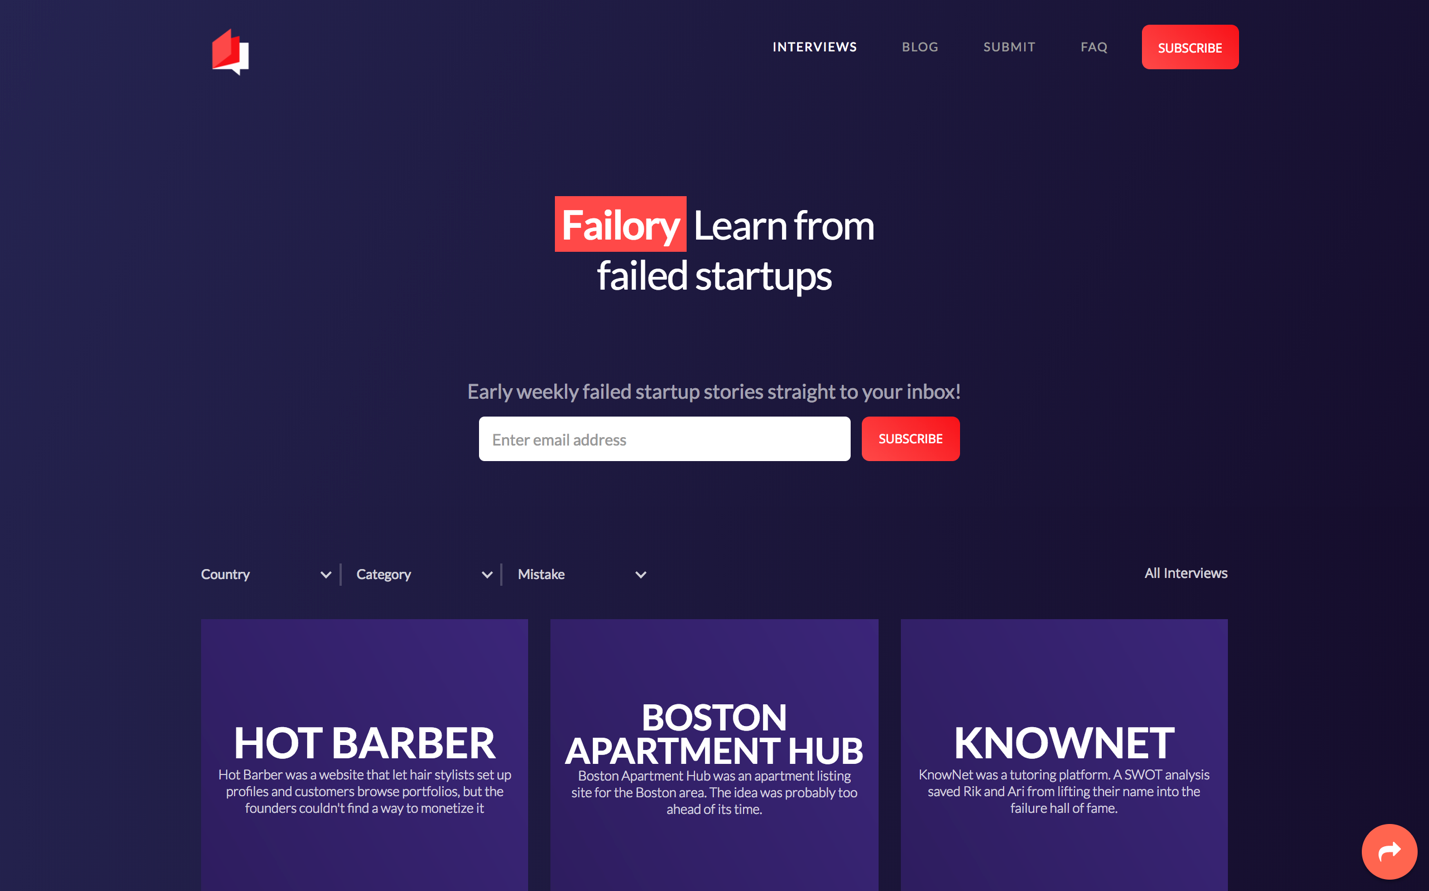 he-built-a-profitable-website-dedicated-to-sharing-why-businesses-fail